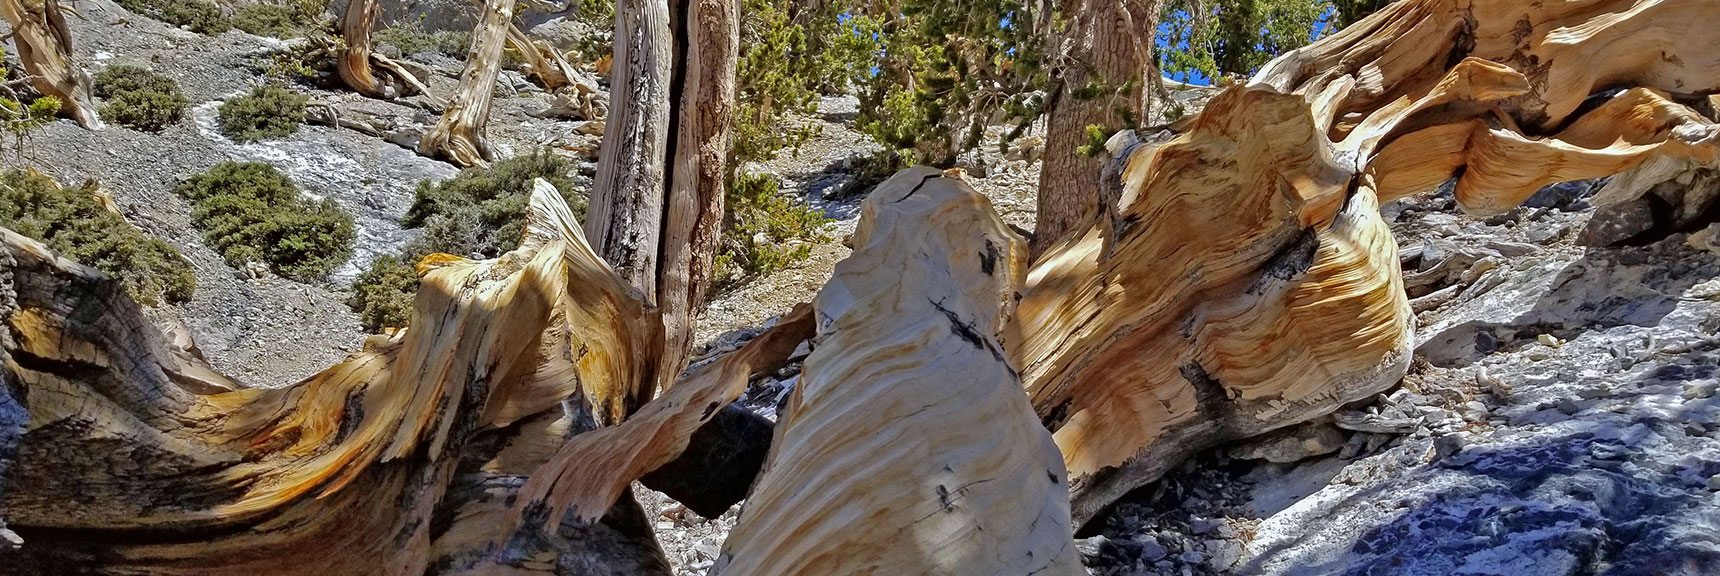 The Bare Wooden Trunks Show Amazing Twisting Patterns | The Sisters South | Lee Canyon | Mt Charleston Wilderness | Spring Mountains, Nevada